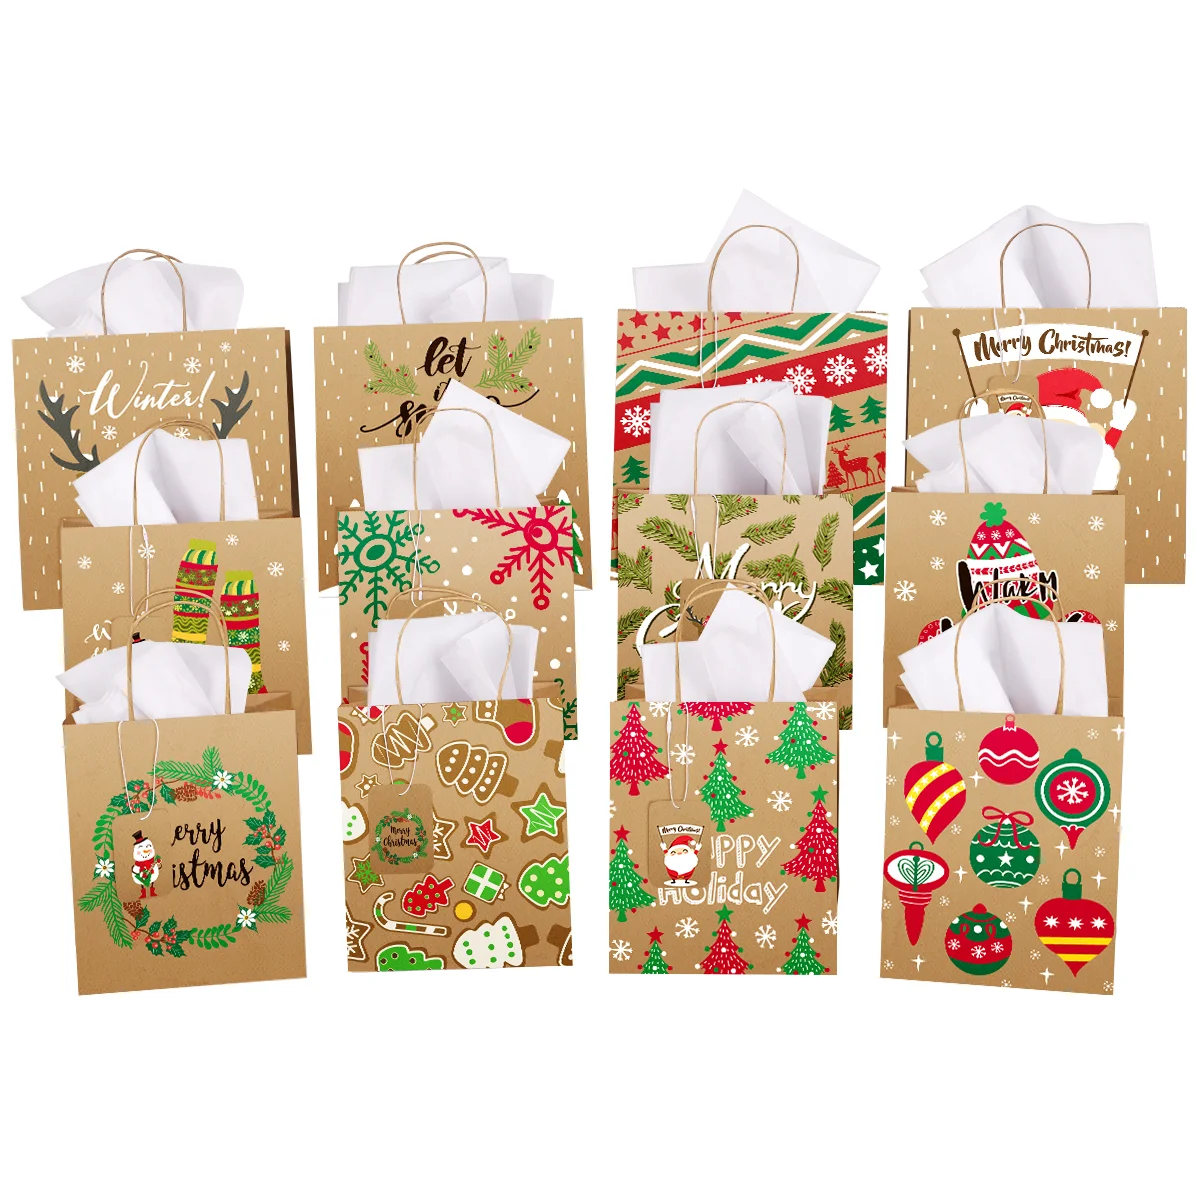 

12pcs Christmas Treat Bags Xmas Paper Candy Bags Handle Gift Present Wrapping Bags Boutique Gift Bag with Tissue Paper Tags